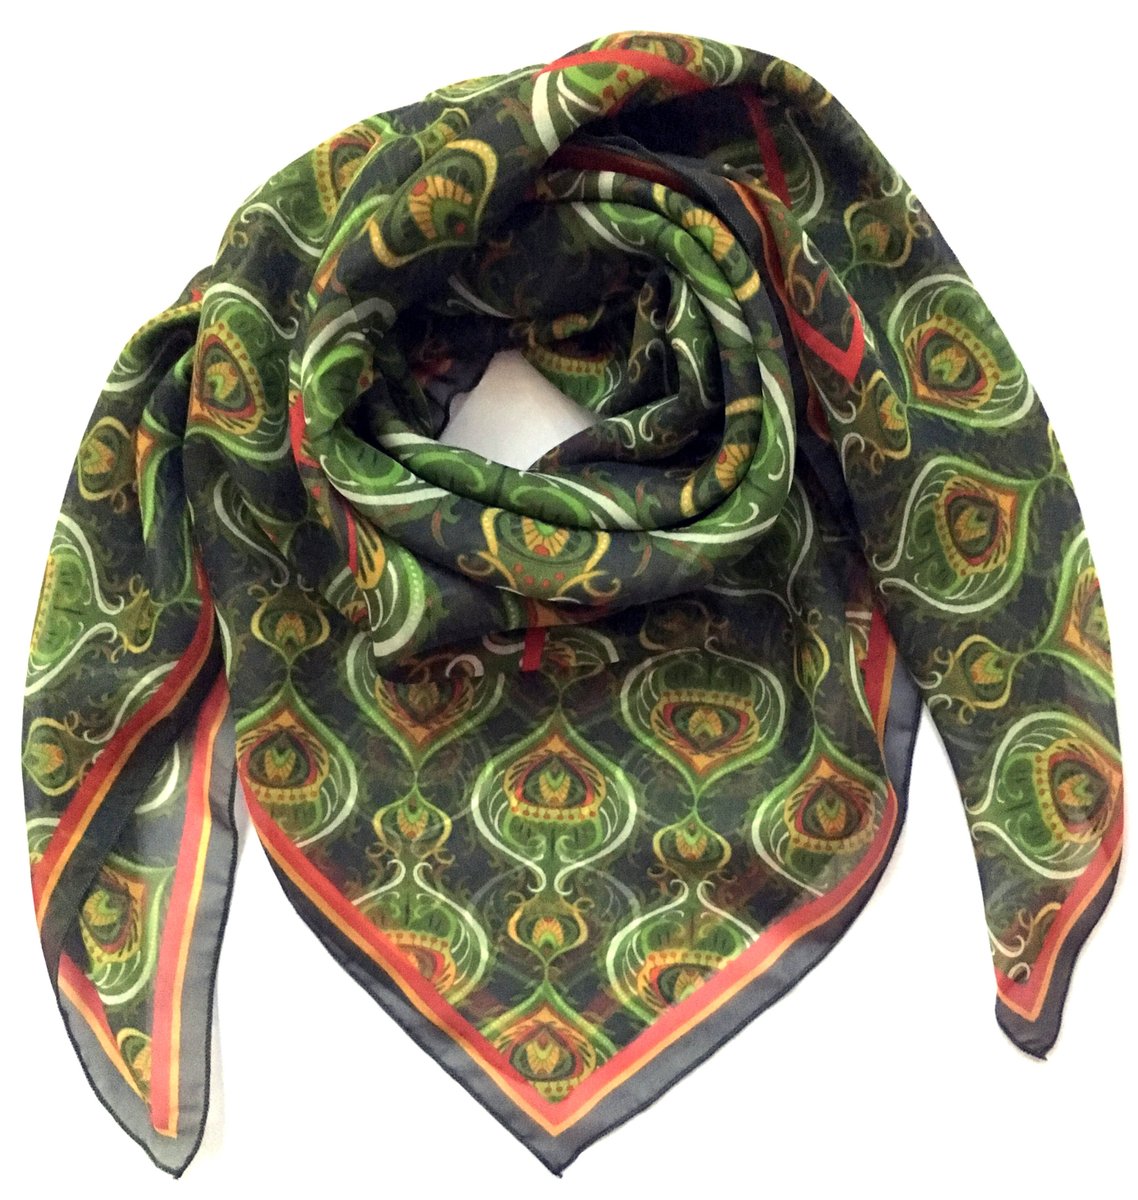 Keep the chill out in style stanandgwyn.com/product-page/g… 💚 #earlybiz #mod #modstyle #thecraftinghouse #scarves #ladiesfashion #womensaccessories #green #fashion #staygreen #70s #modernretro #60s #retroprints #modfashion #seventiesfashion #70sfashion #FridayFeeling